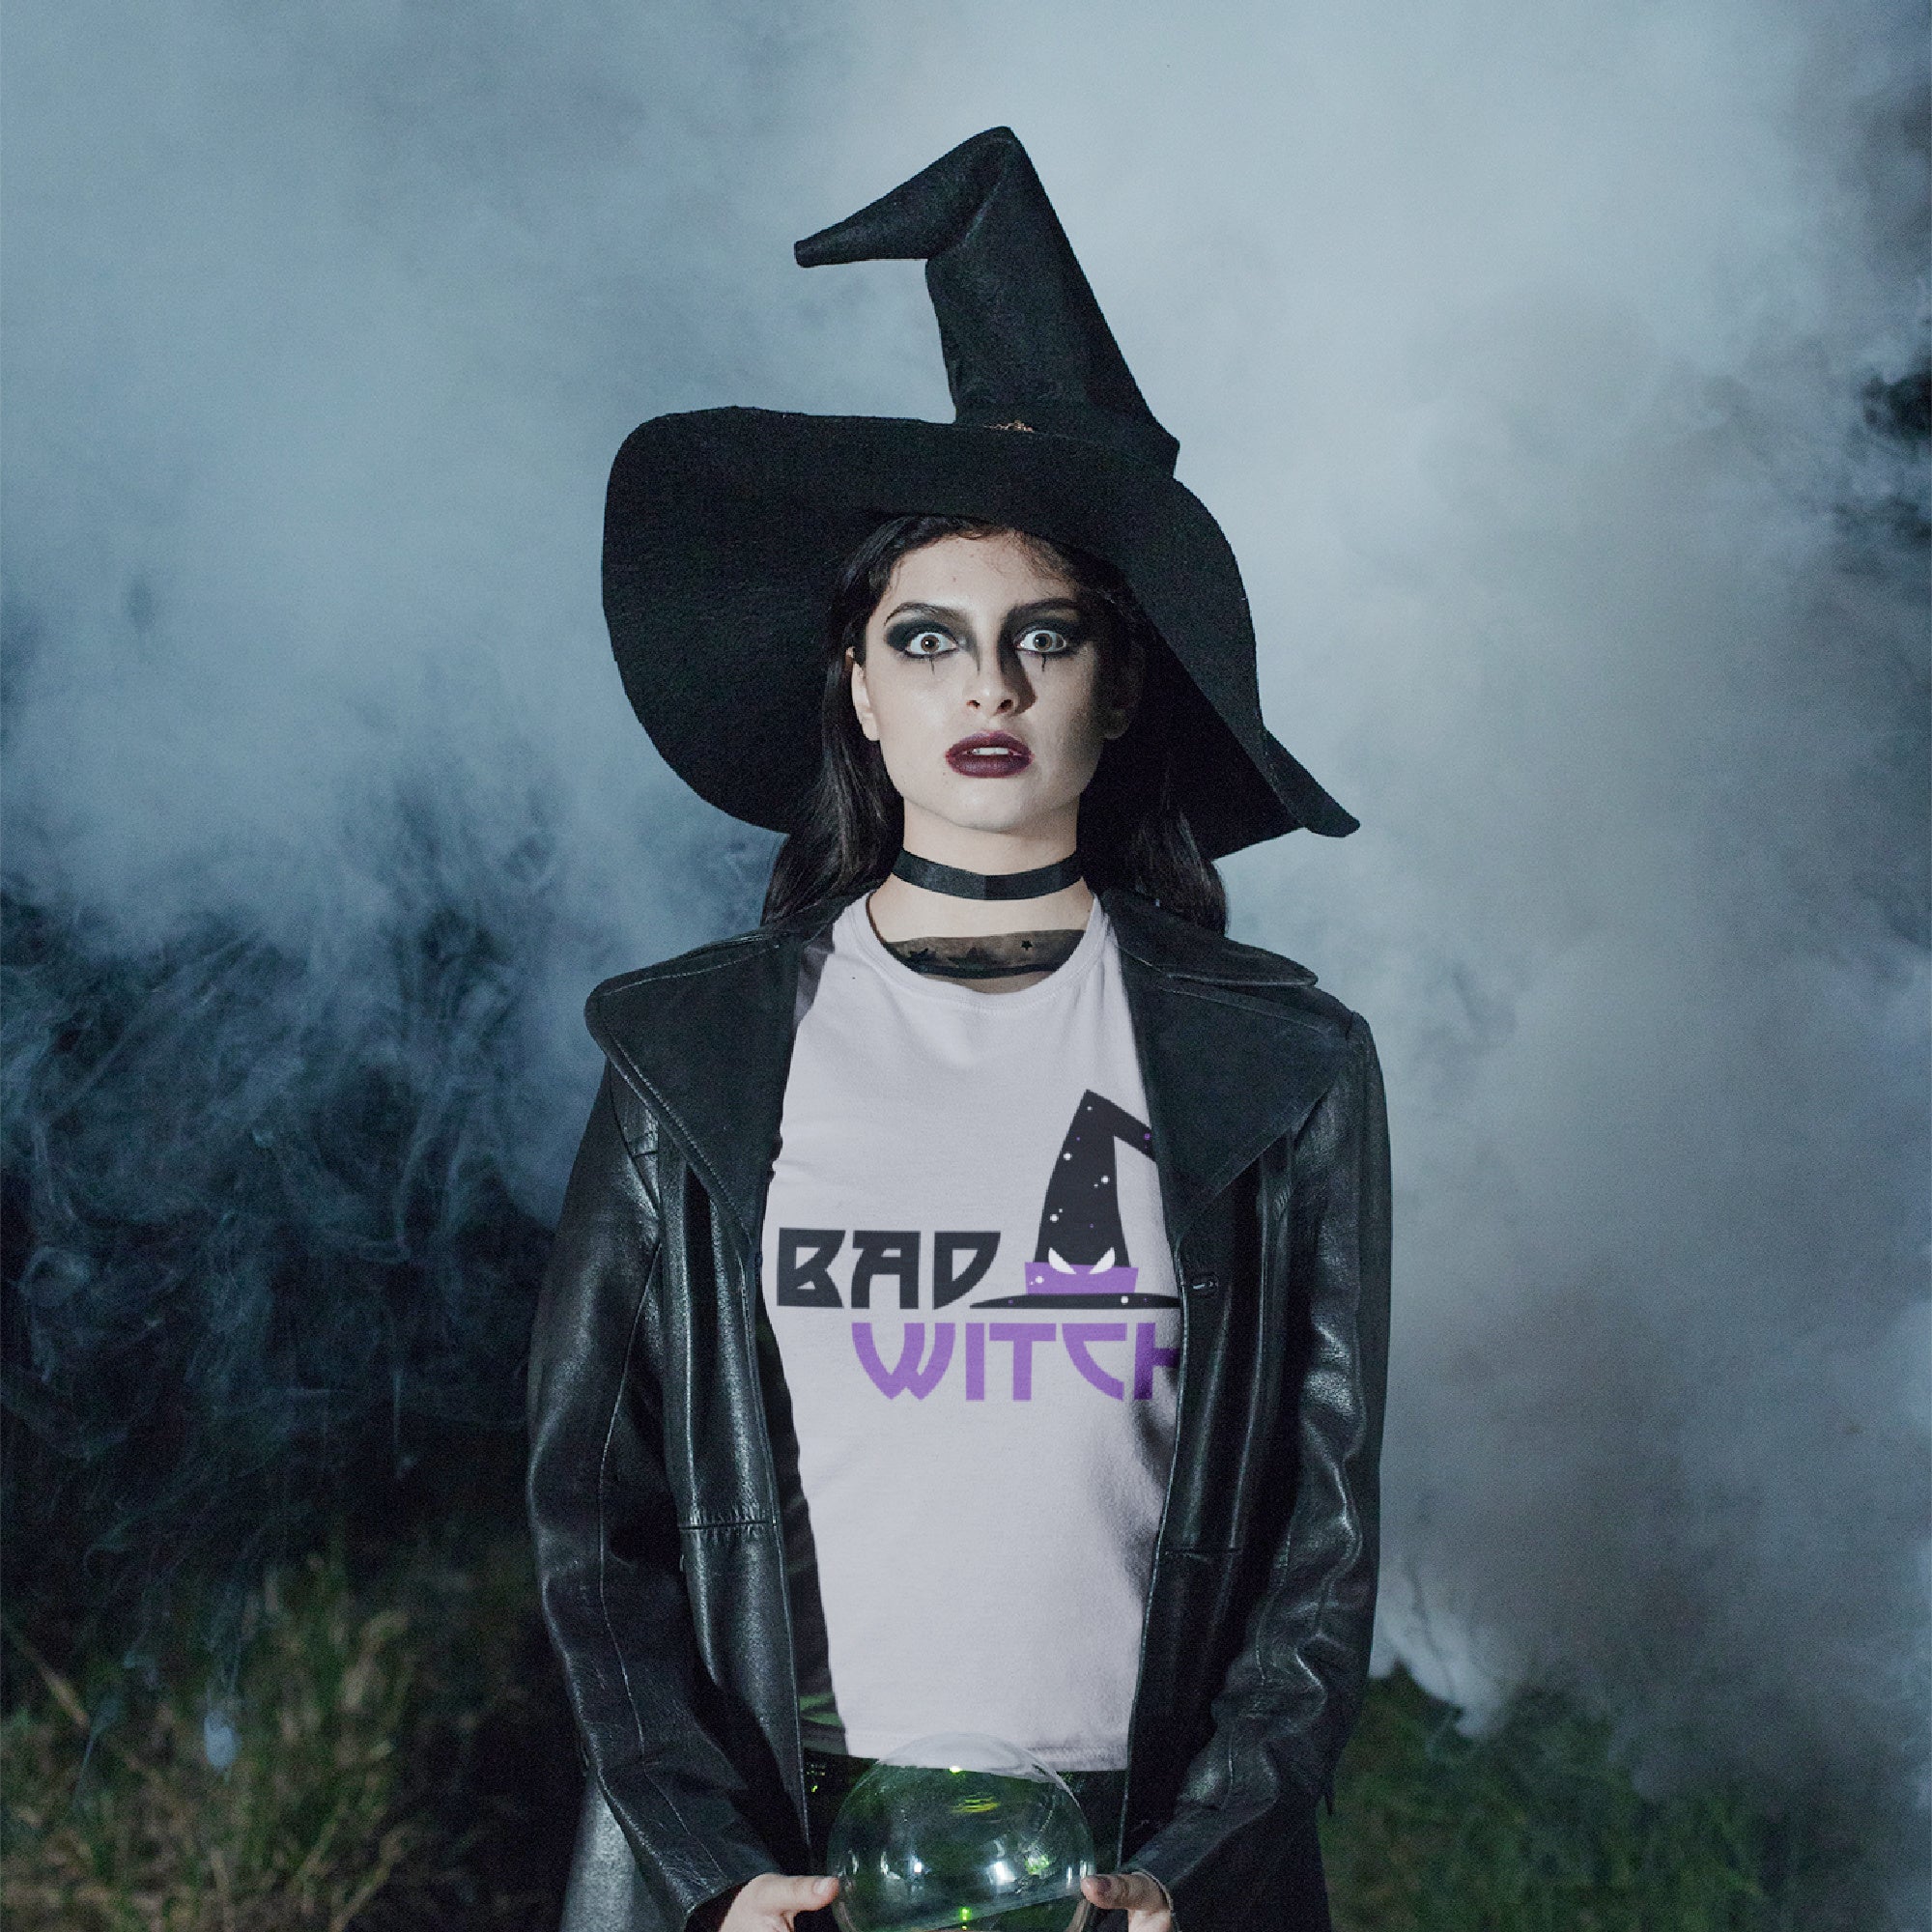 Mock up of a Woman wearing a spooky witch costume and our Women's Slim-Fit T-shirt with the Bad Witch design